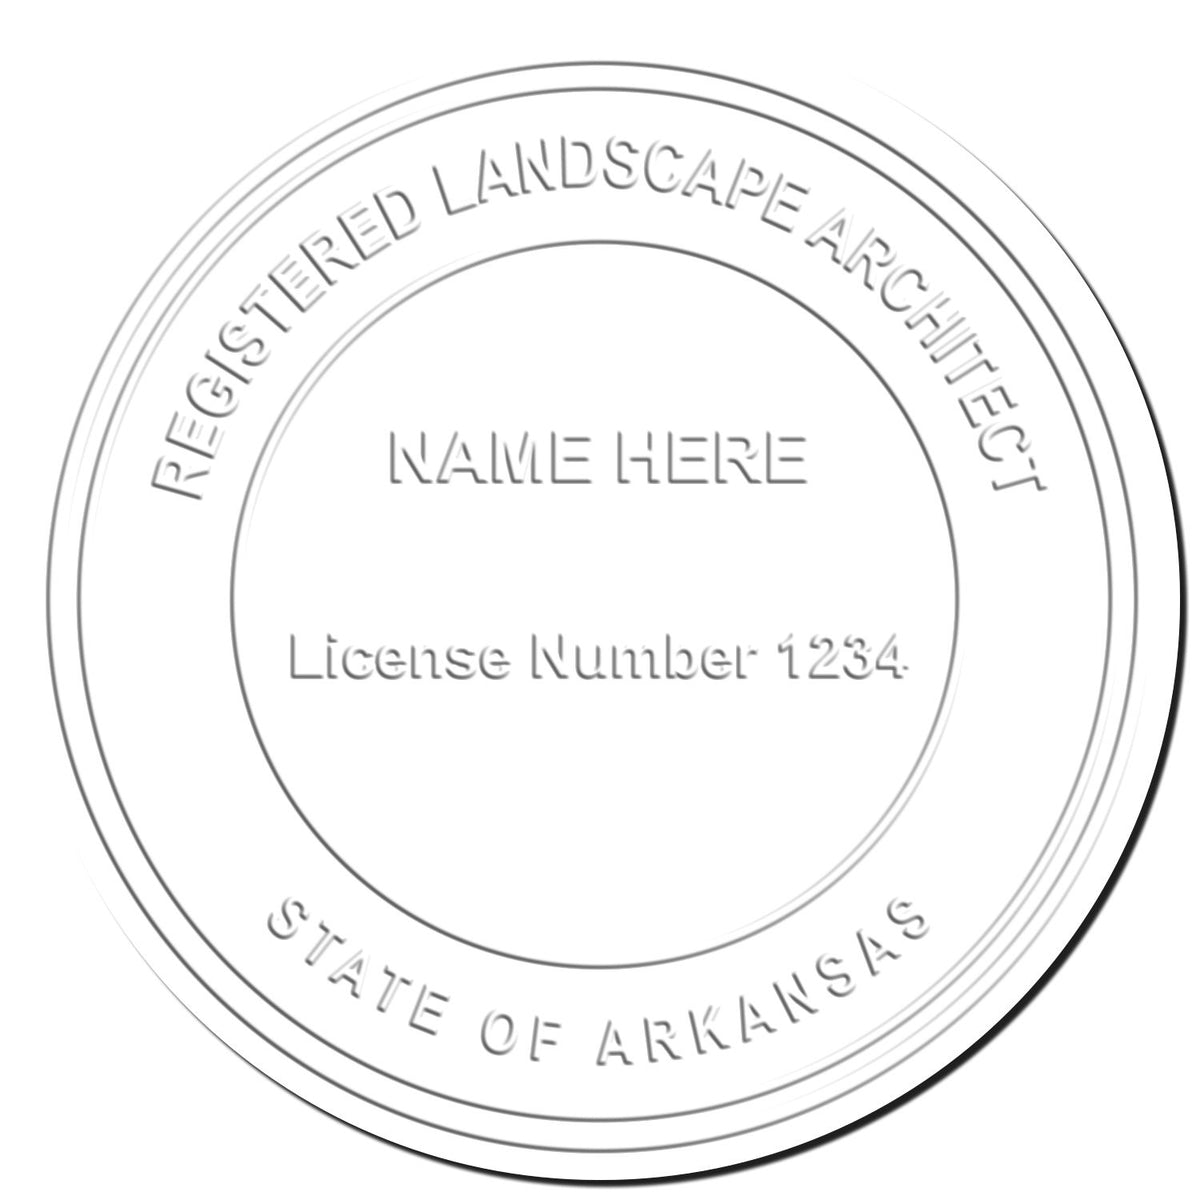 This paper is stamped with a sample imprint of the Hybrid Arkansas Landscape Architect Seal, signifying its quality and reliability.